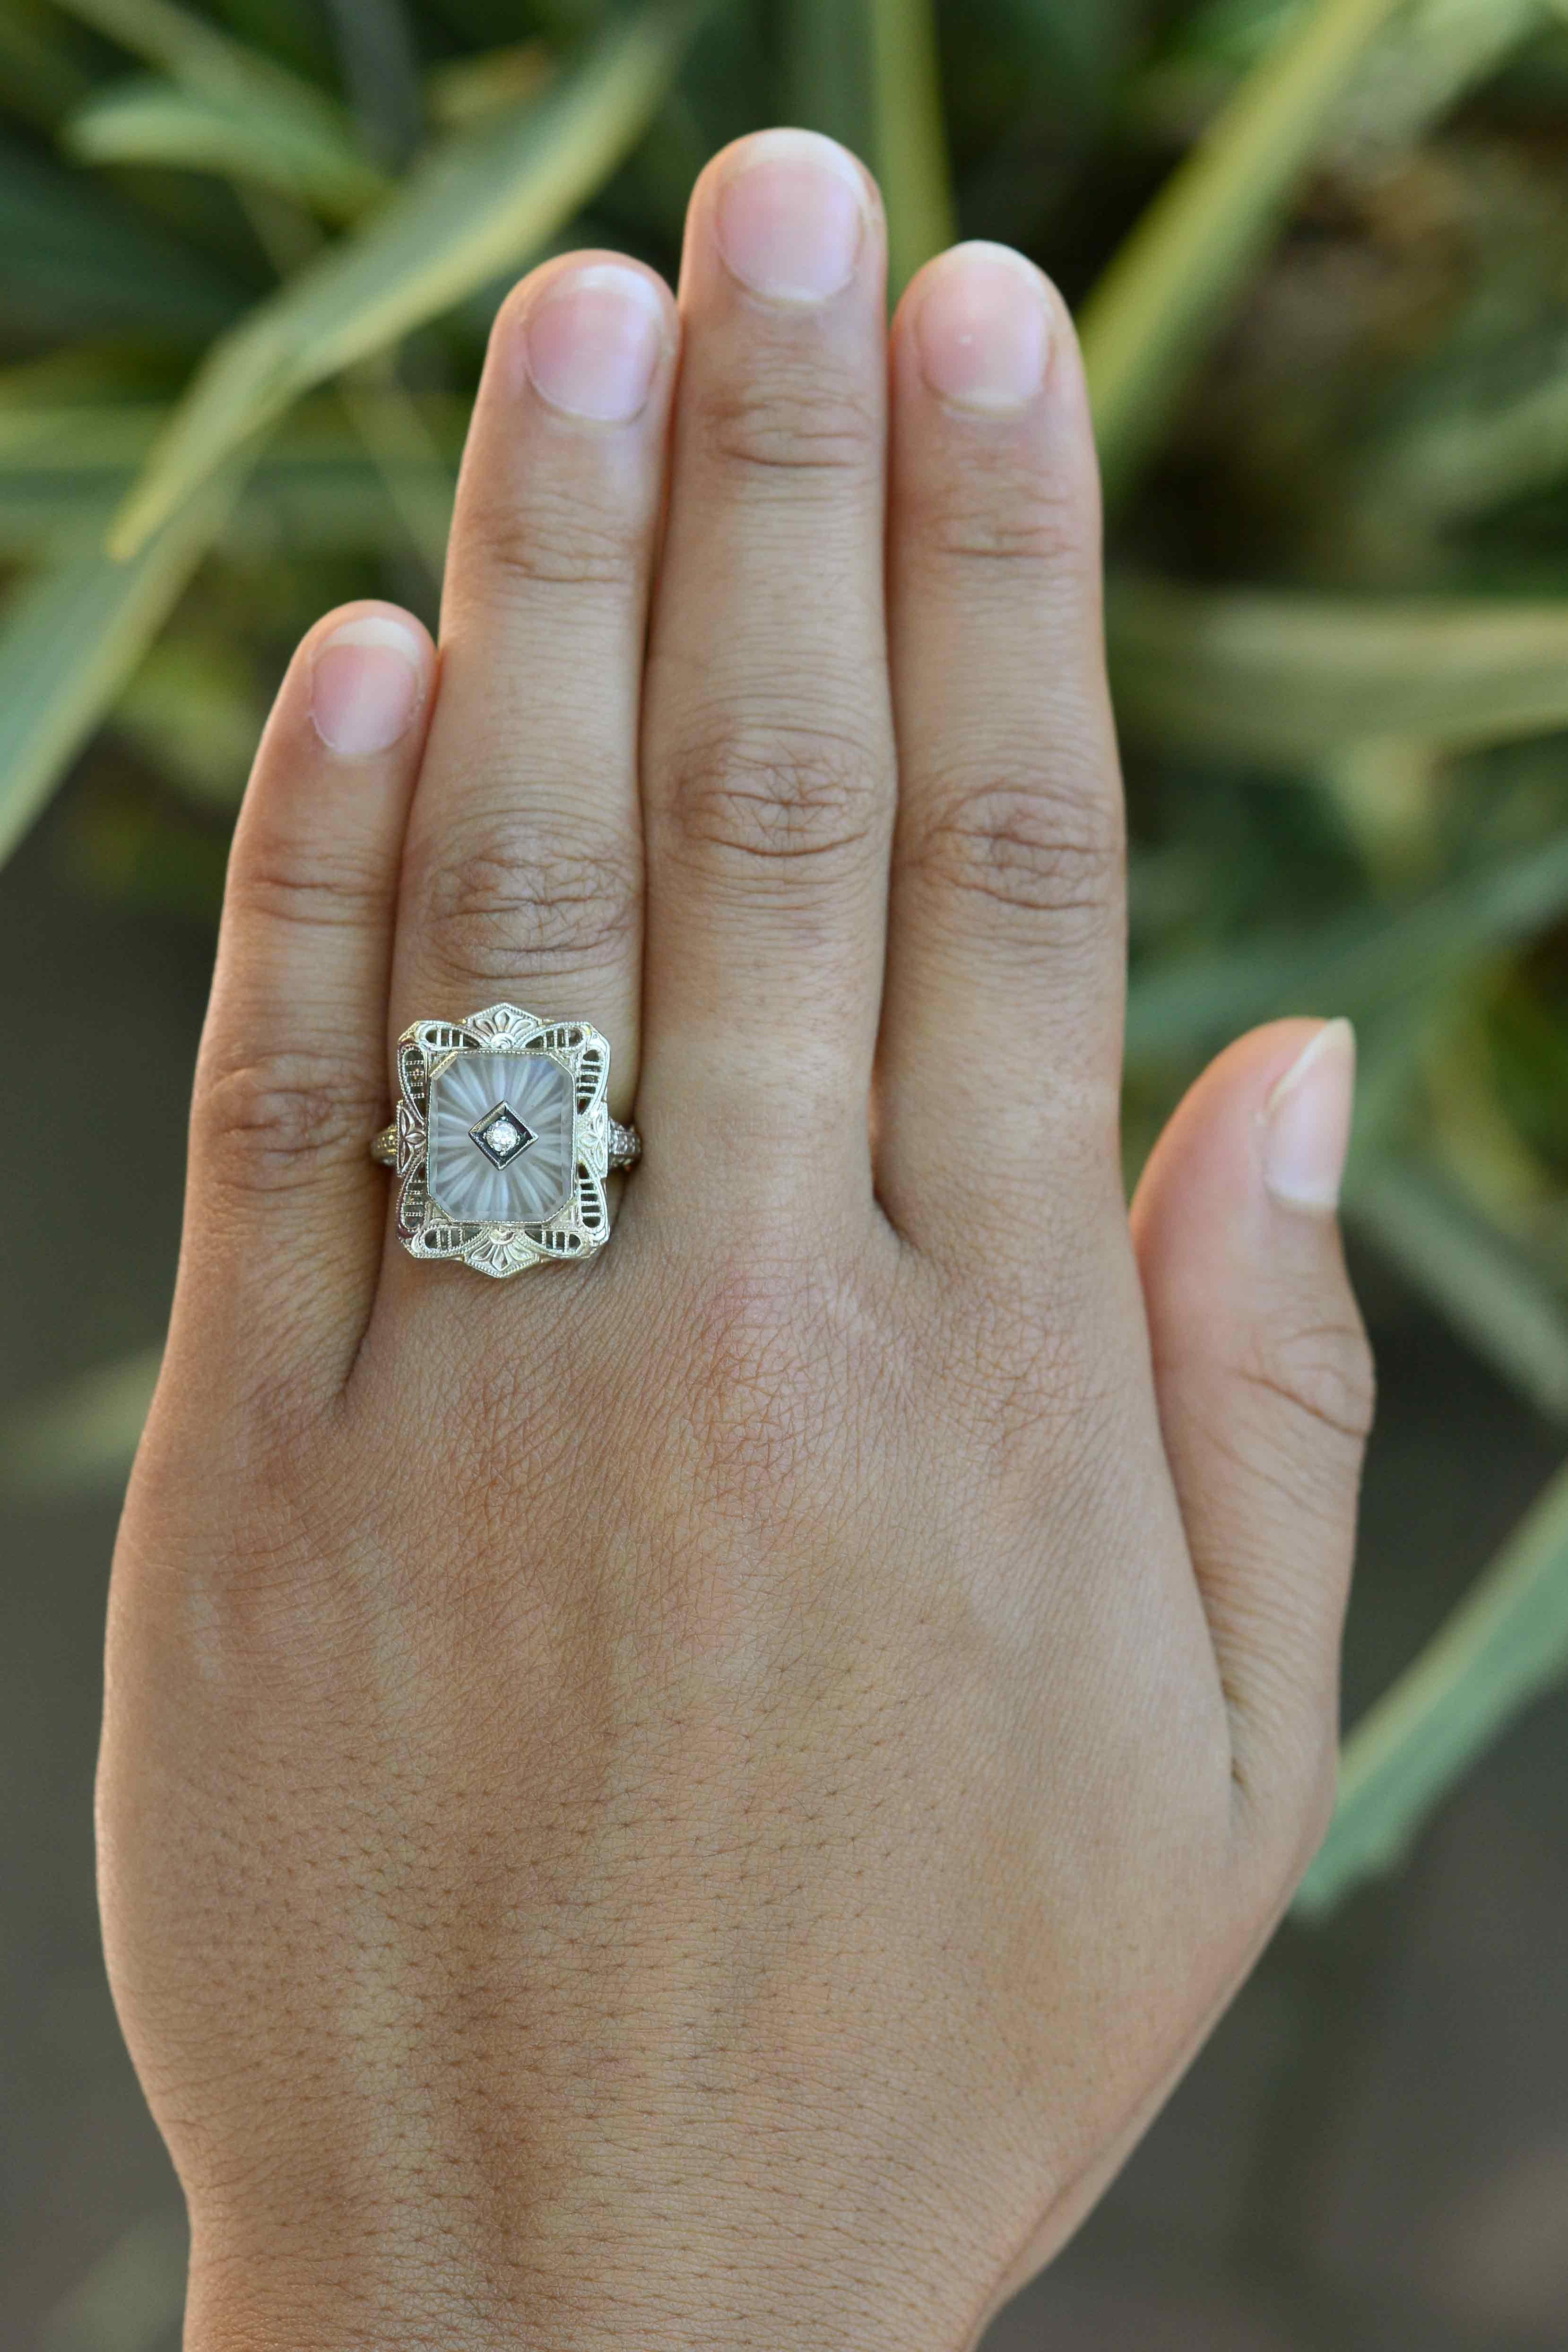 An elegant vintage Art Deco filigree engagement ring. Beaming from the center, a natural sun ray crystal radiates with a soft, frosty glow held within an architectural inspired frame with a shield shape. The lacy openwork dotted with dainty milgrain